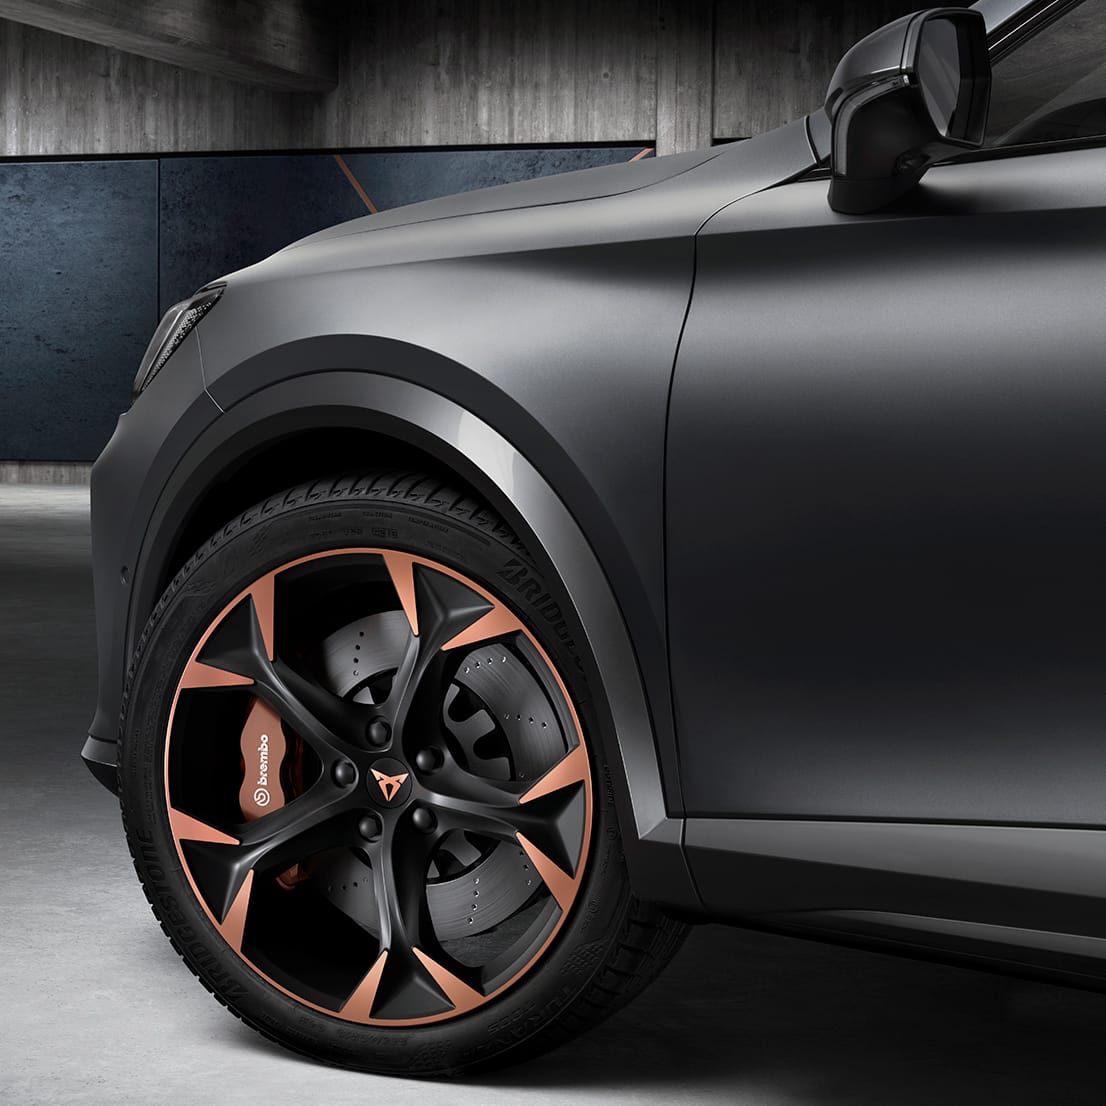 new CUPRA Formentor SUV coupe 19 inch alloy wheels close up view